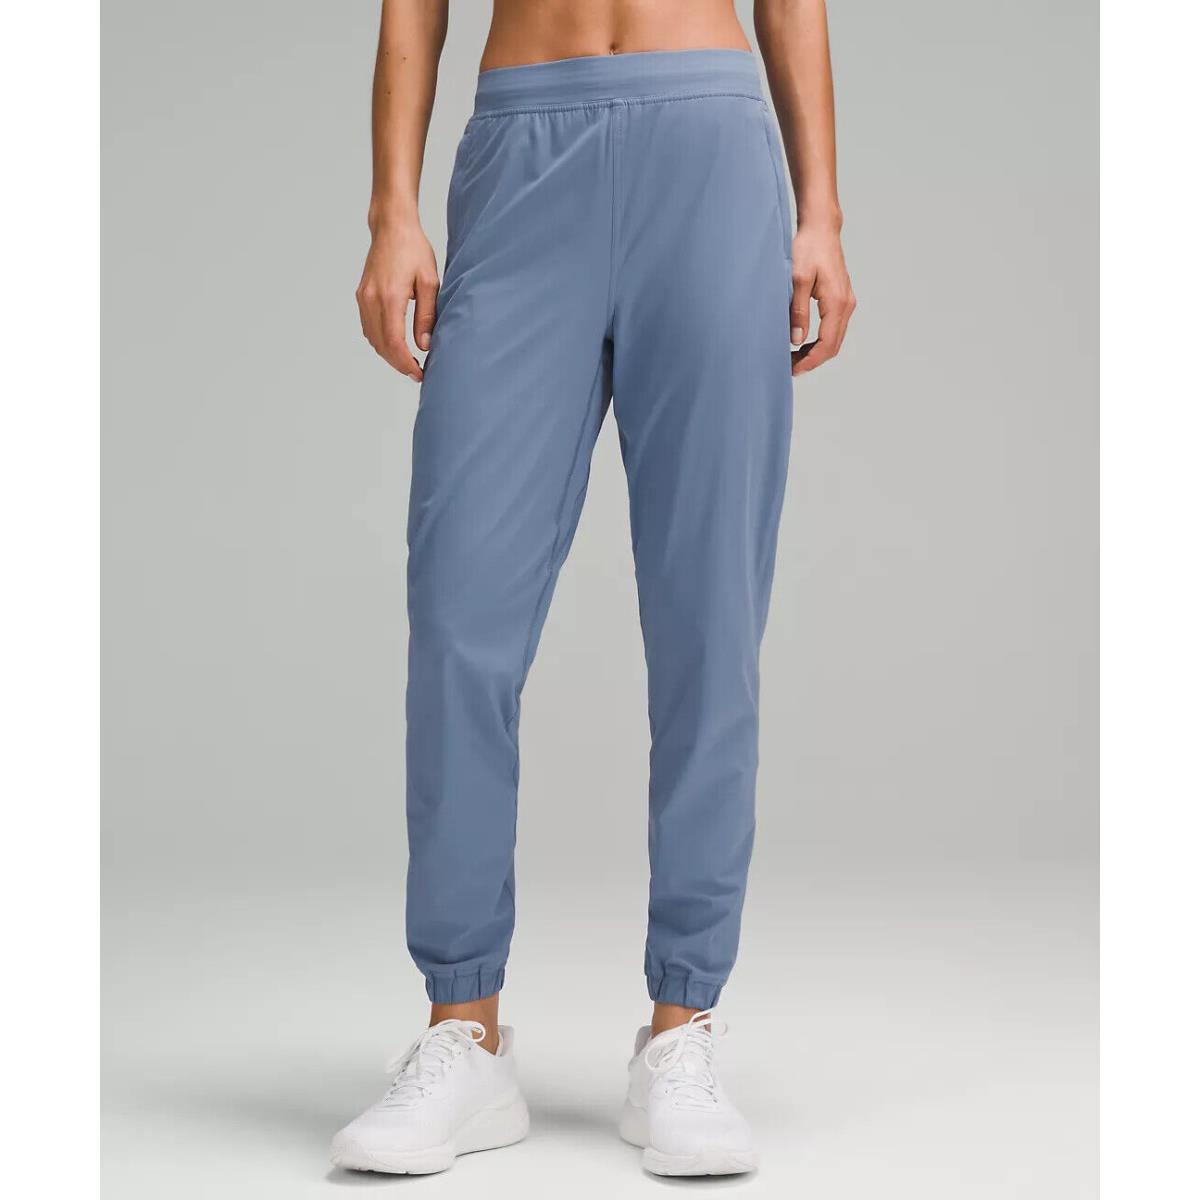 Lululemon Adapted State High Rise Jogger - Retail